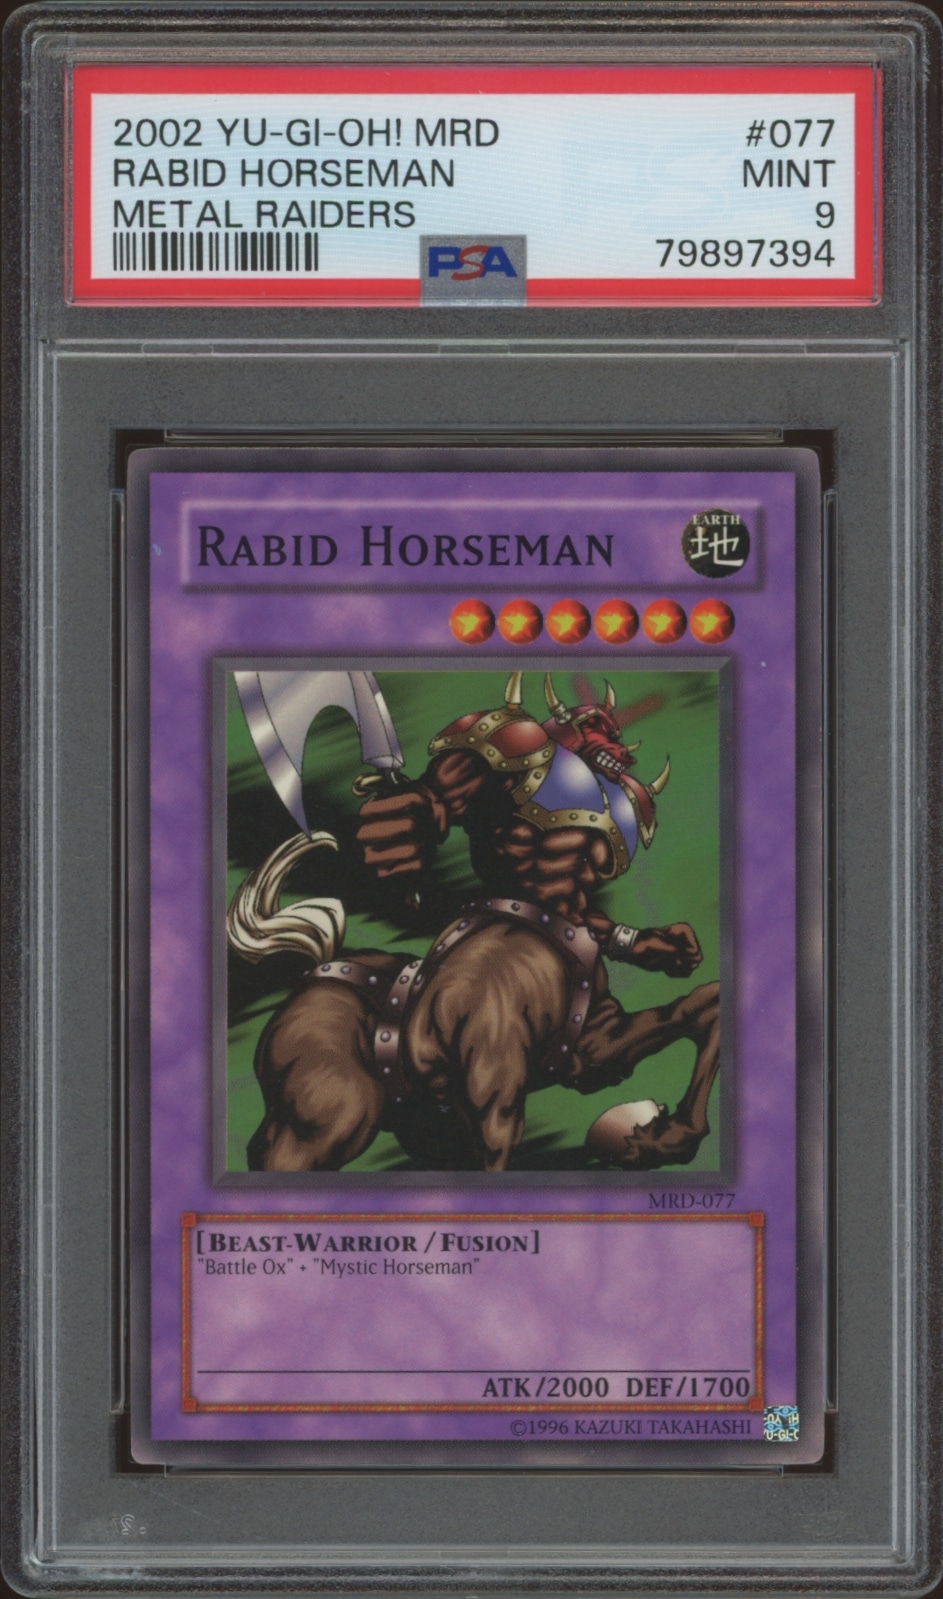 Graded 2002 Yu-Gi-Oh! Rabid Horseman trading card in mint condition with unique artwork.